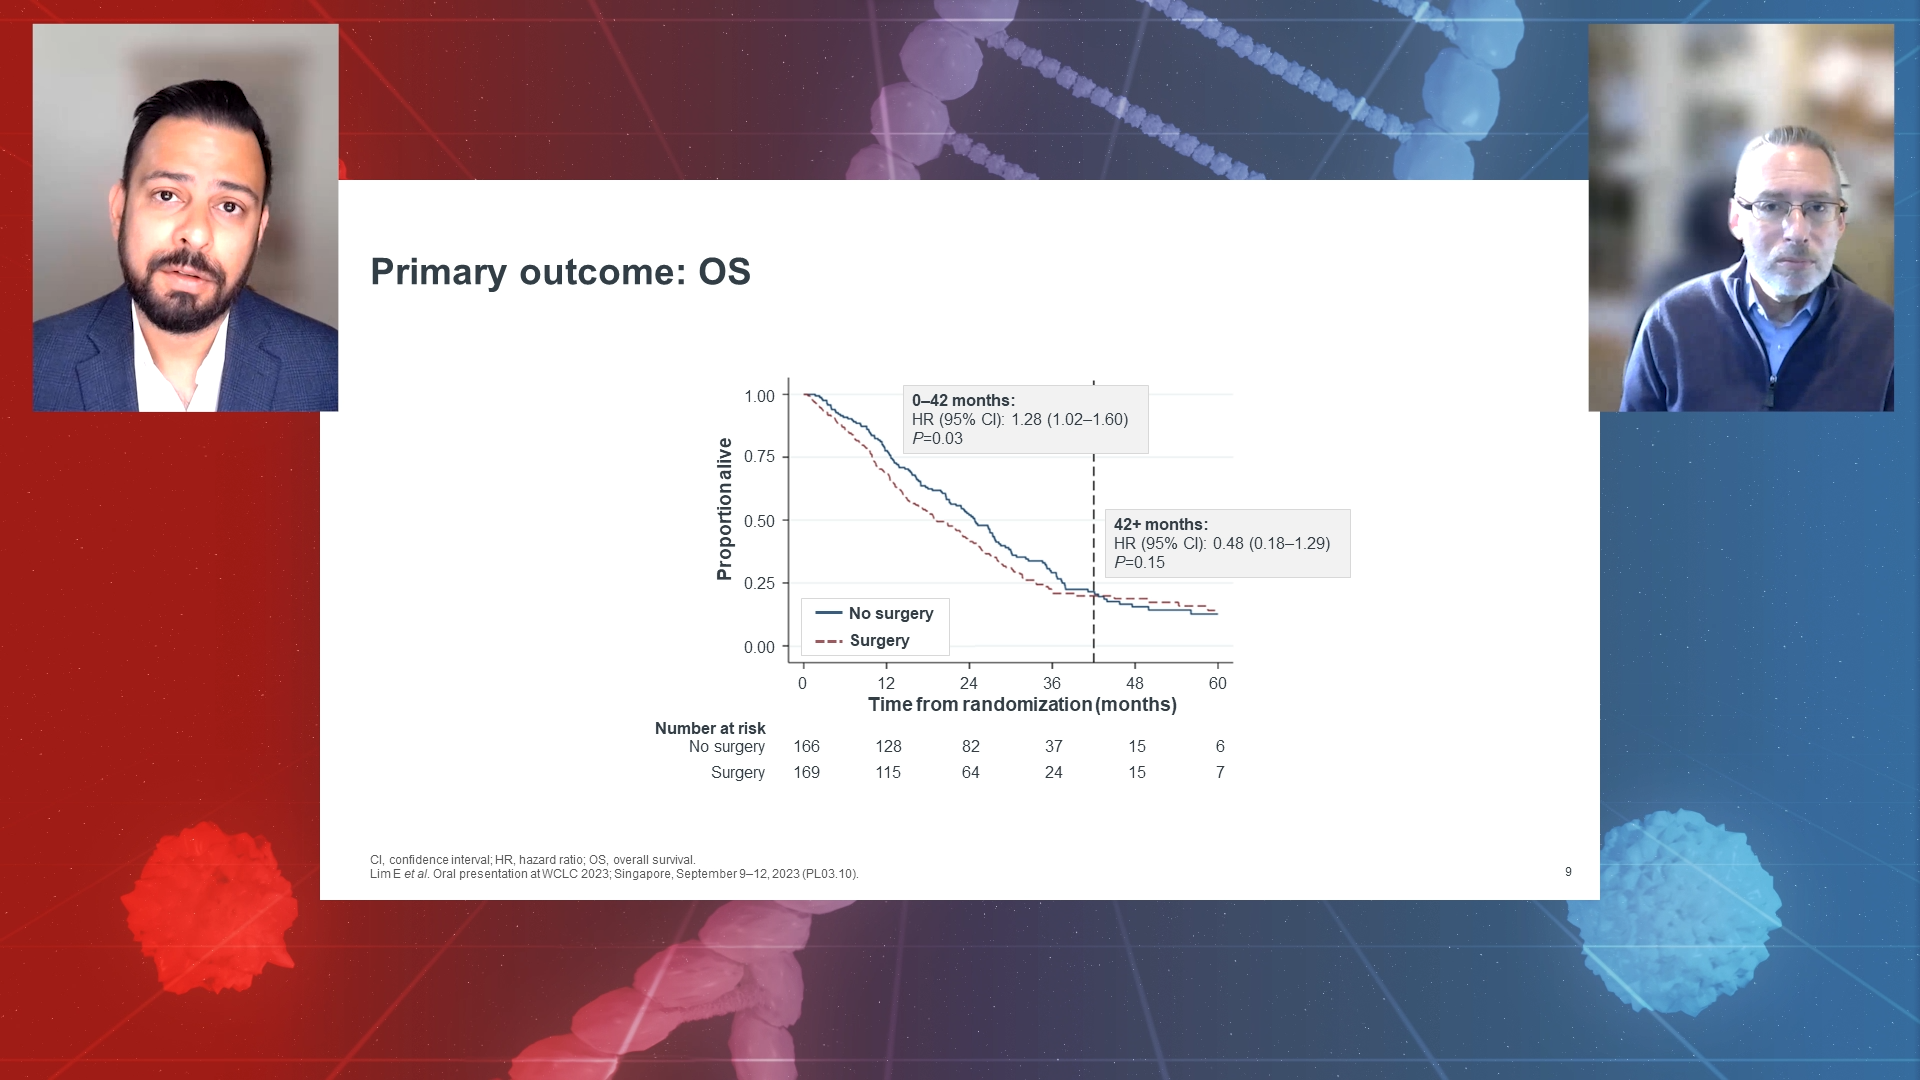 WCLC 2023 highlights MARS 2 trial results and impact